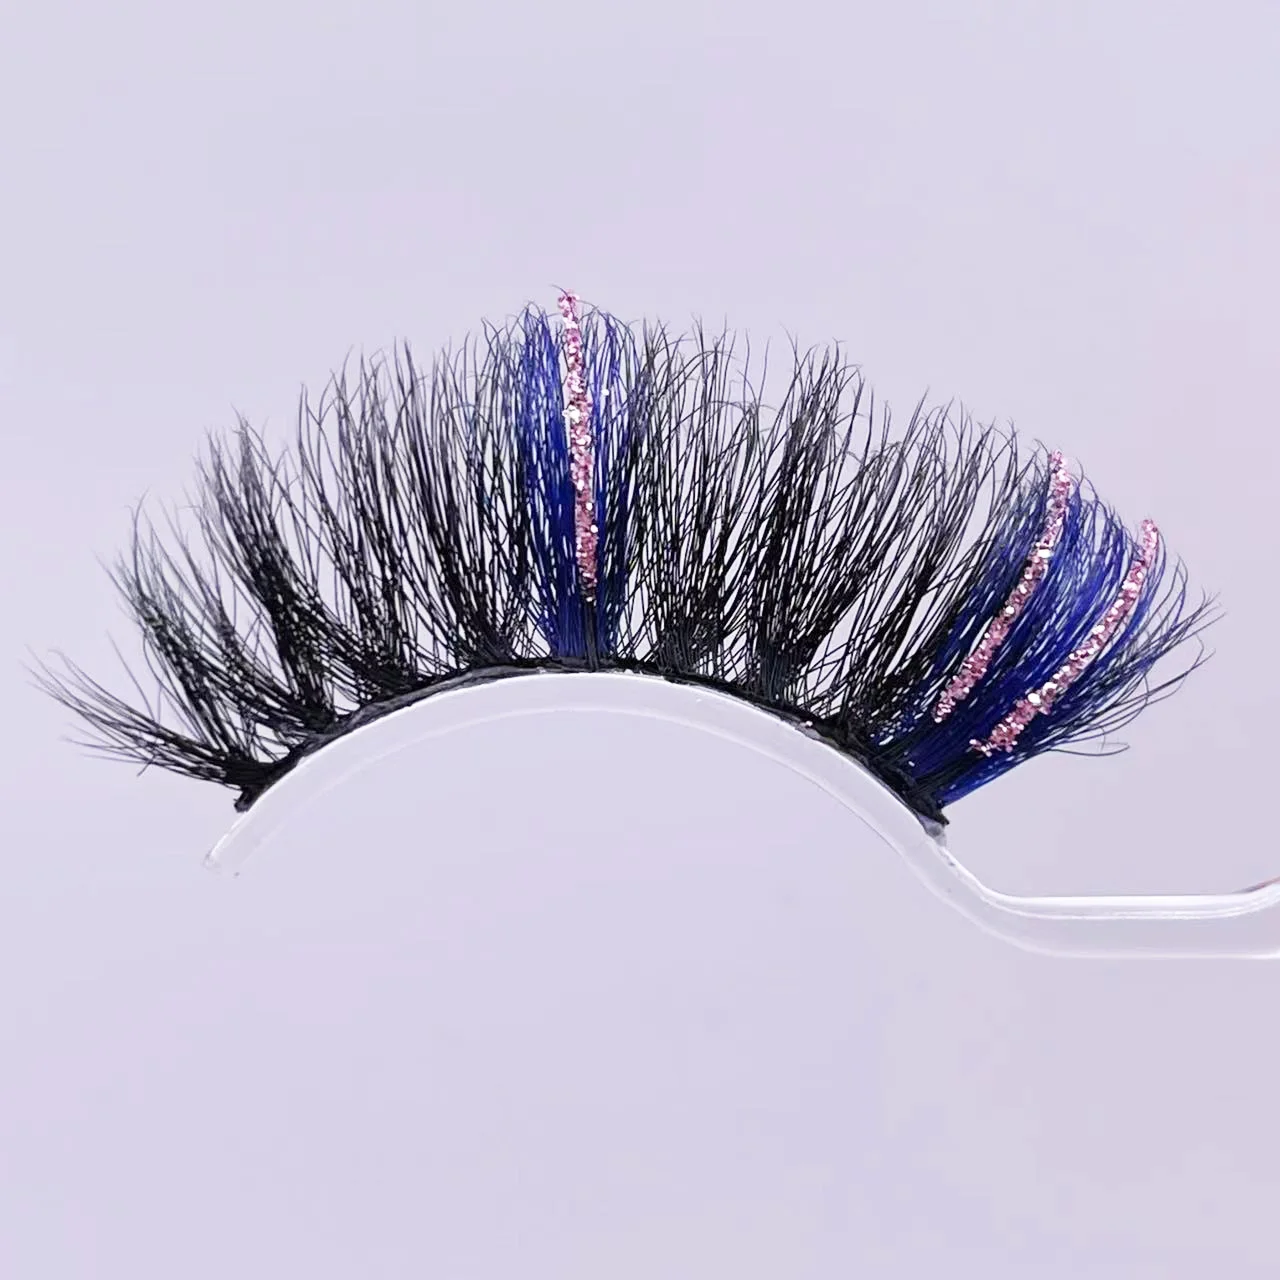 Hbzgtlad Colored Lashes Glitter Mink 15mm -20mm Fluffy Color Streaks Cosplay Makeup Beauty Eyelashes -Outlet Maid Outfit Store Scf0c66174c75407f86d341859e752d77s.jpg